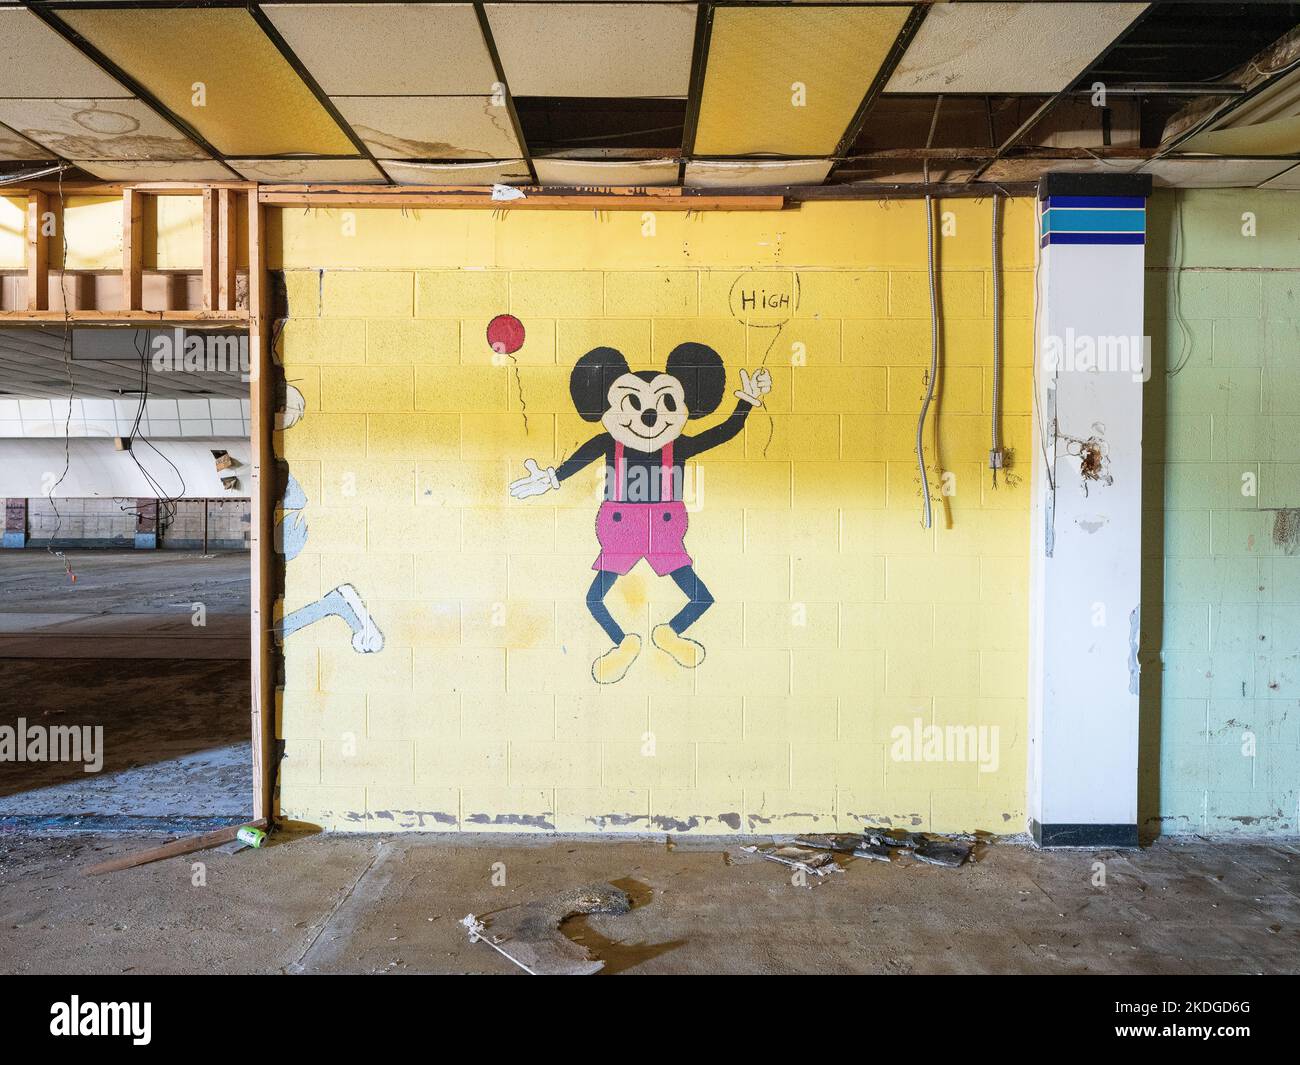 Cartoon character painted on wall in disused building Stock Photo